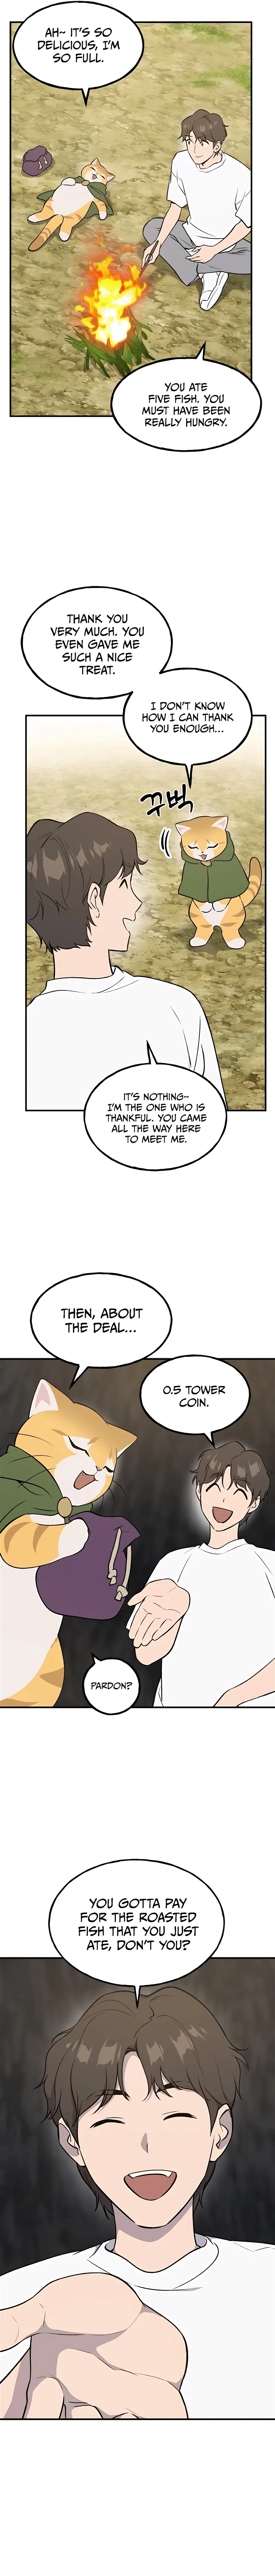 Solo Farming In The Tower Chapter 11 page 7